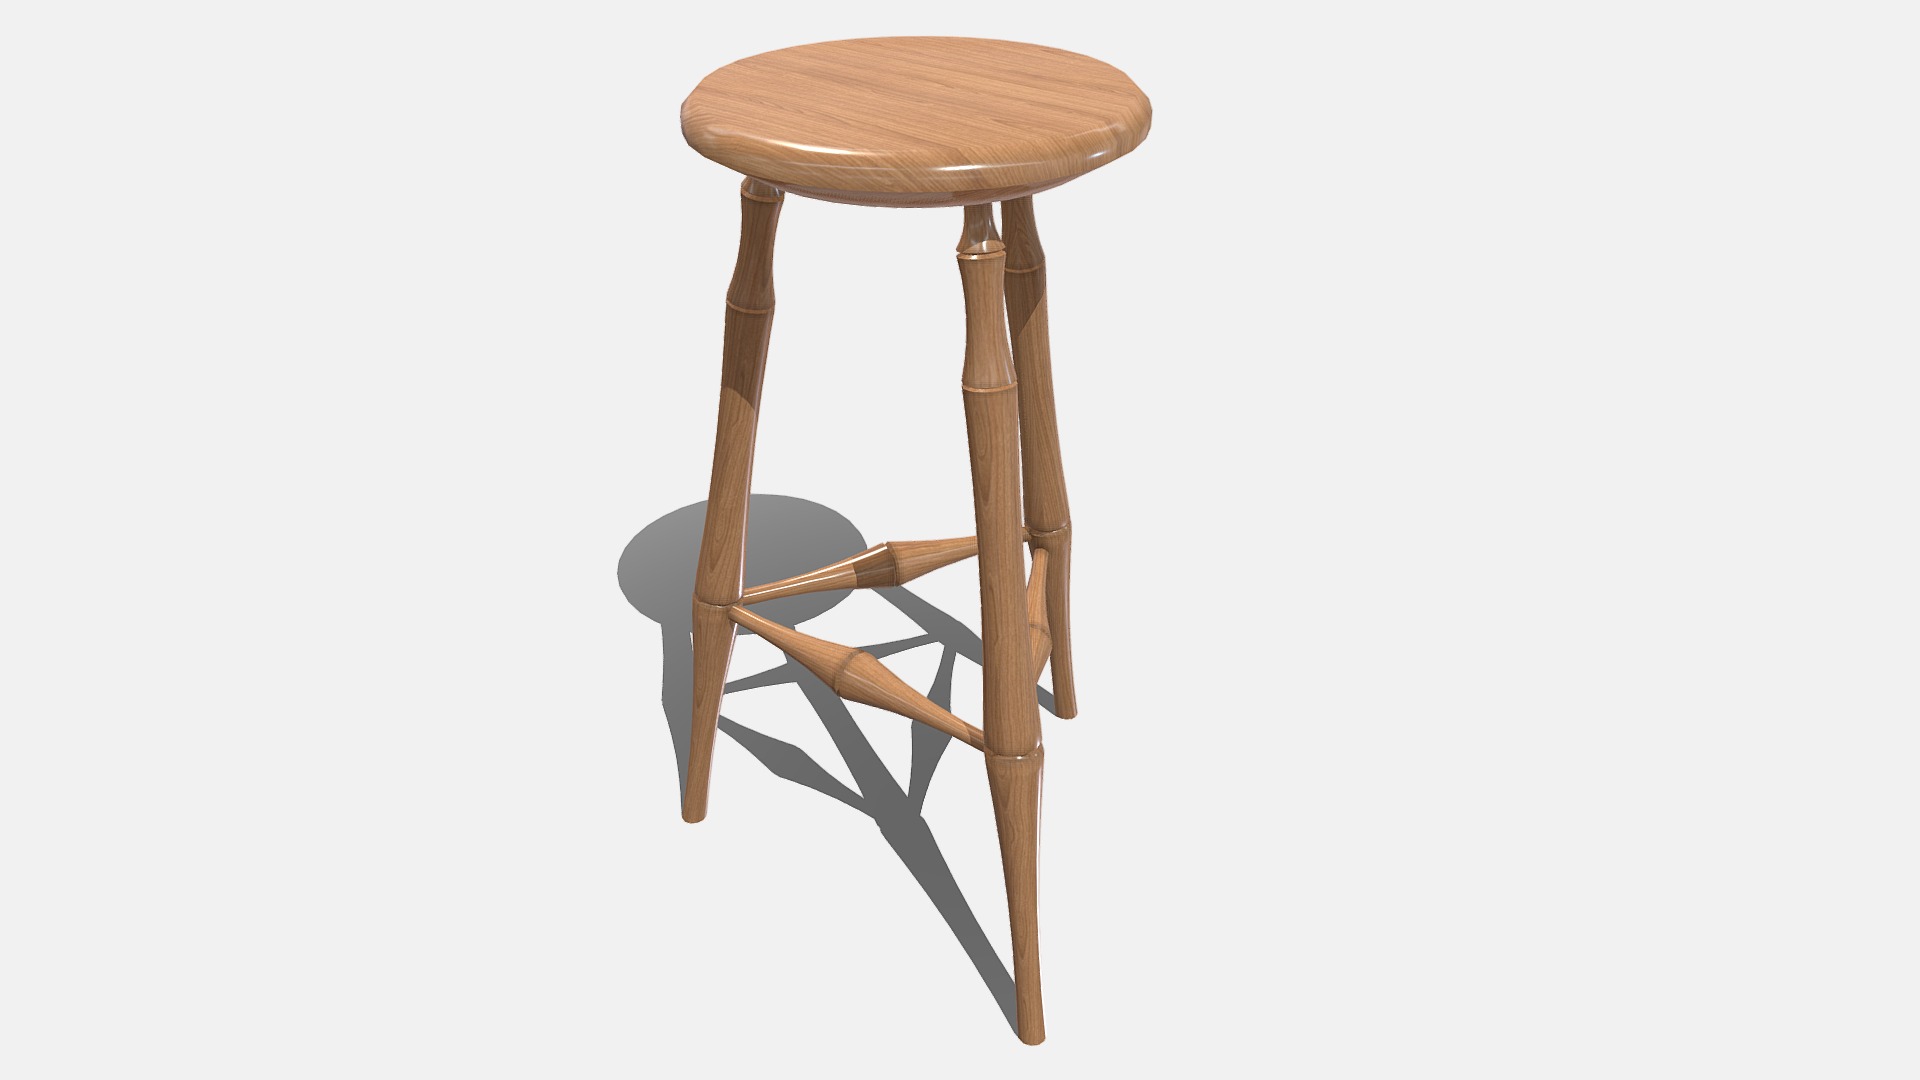 3D model Stool - This is a 3D model of the Stool. The 3D model is about a wooden stool with a seat.